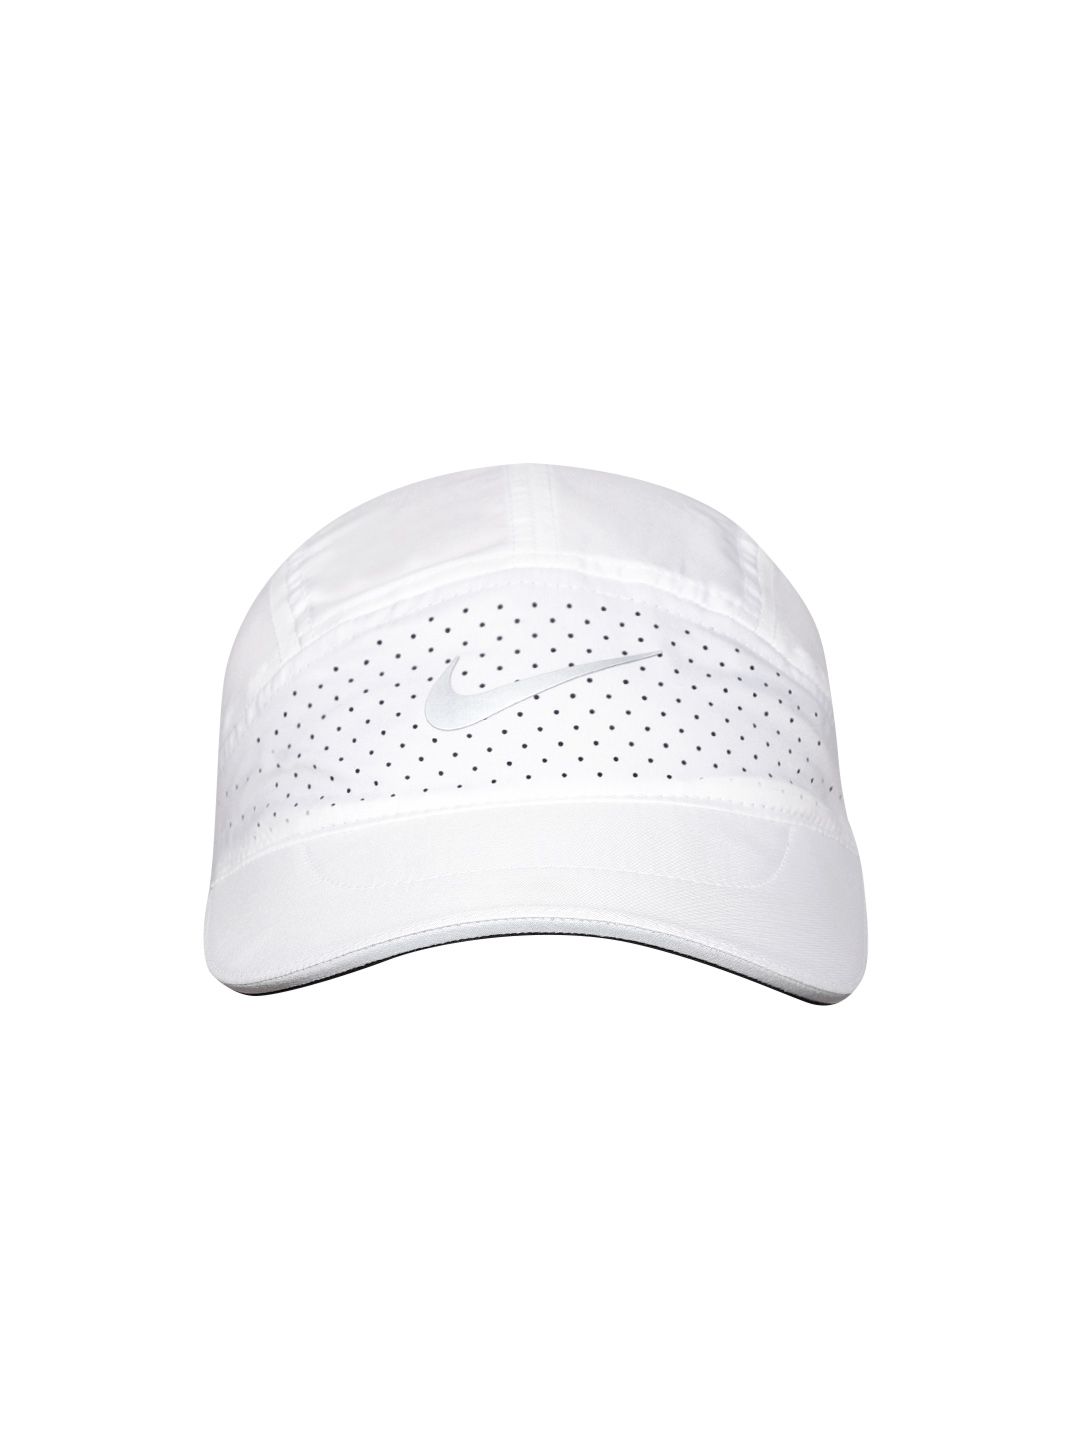 Nike Unisex White Solid DRY AROBILL TLWD Baseball Cap Price in India